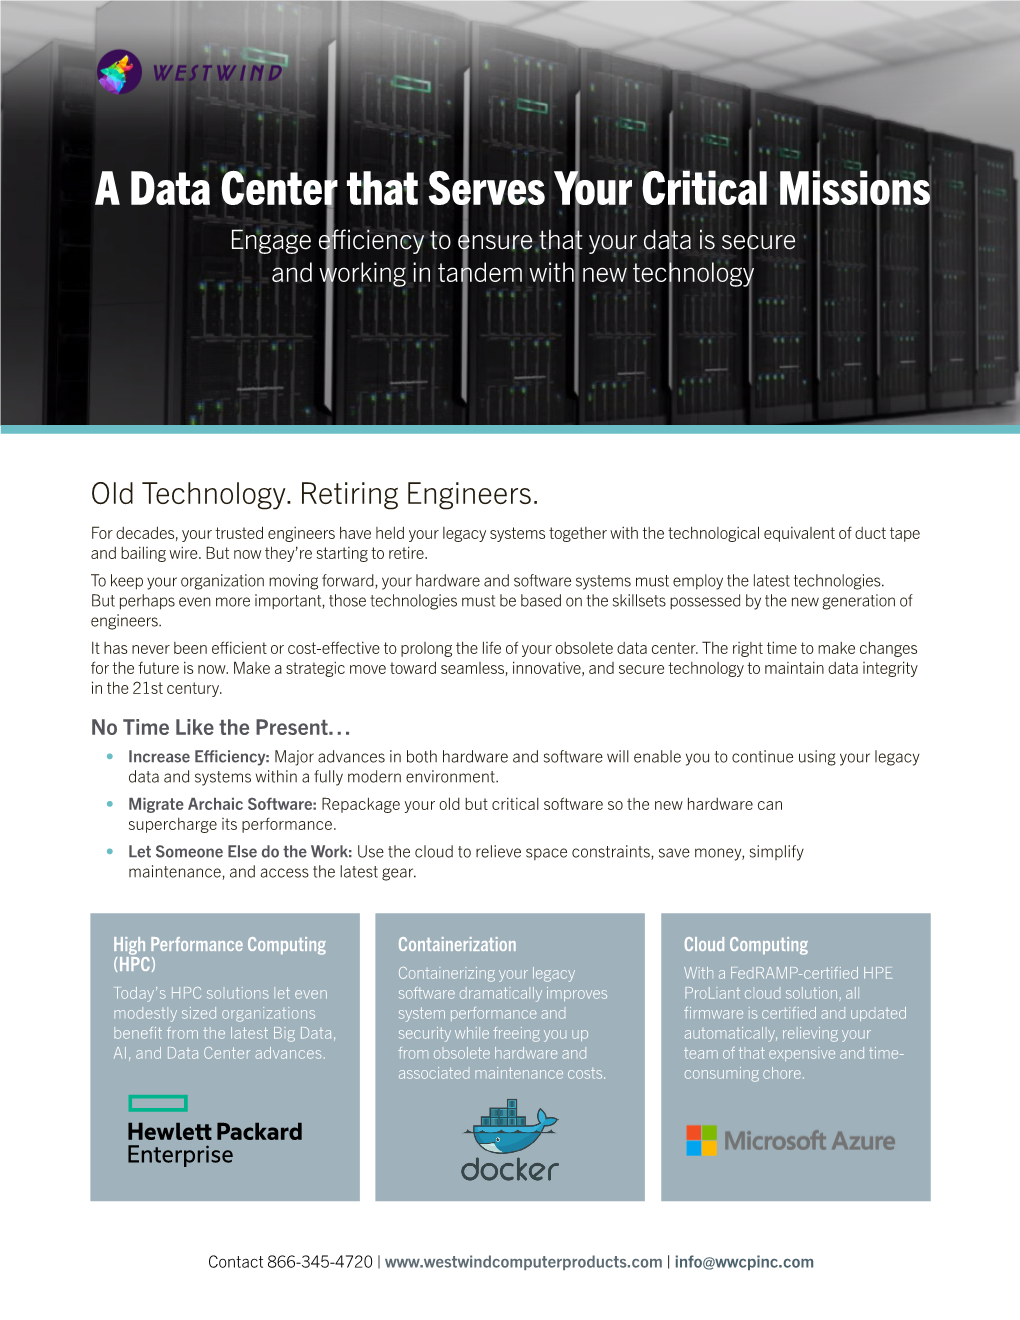 A Data Center That Serves Your Critical Missions Engage Efficiency to Ensure That Your Data Is Secure and Working in Tandem with New Technology